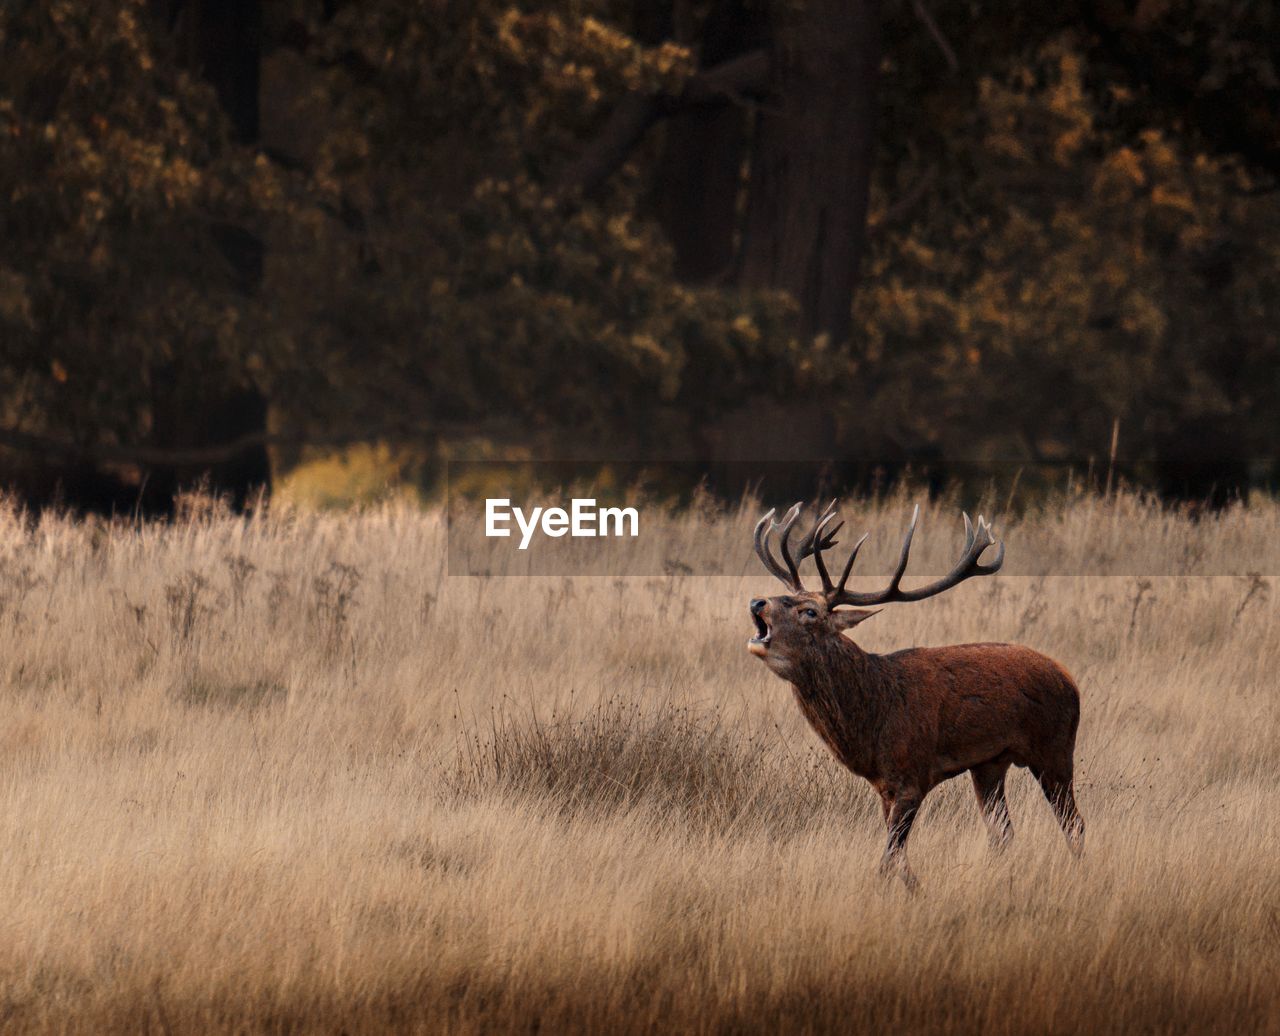 animal, animal themes, animal wildlife, wildlife, mammal, deer, one animal, plant, no people, nature, antler, elk, grass, tree, outdoors, side view, prairie, land, landscape, reindeer, standing, environment, brown, day, domestic animals, herbivorous, beauty in nature, travel destinations, full length